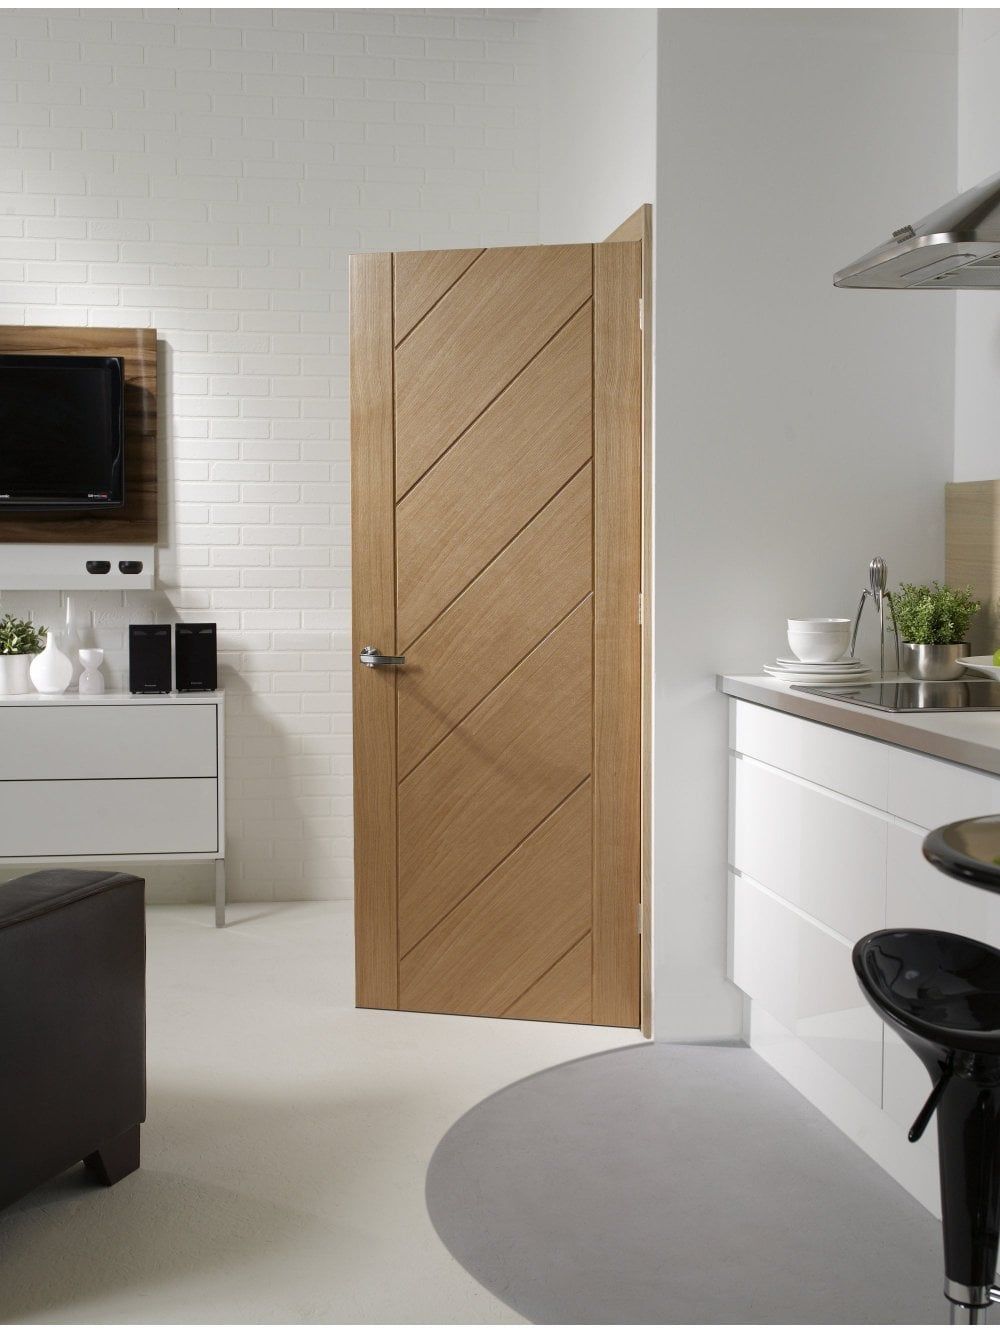 Fire Door Designs: Stylish and Functional Designs for Your Home